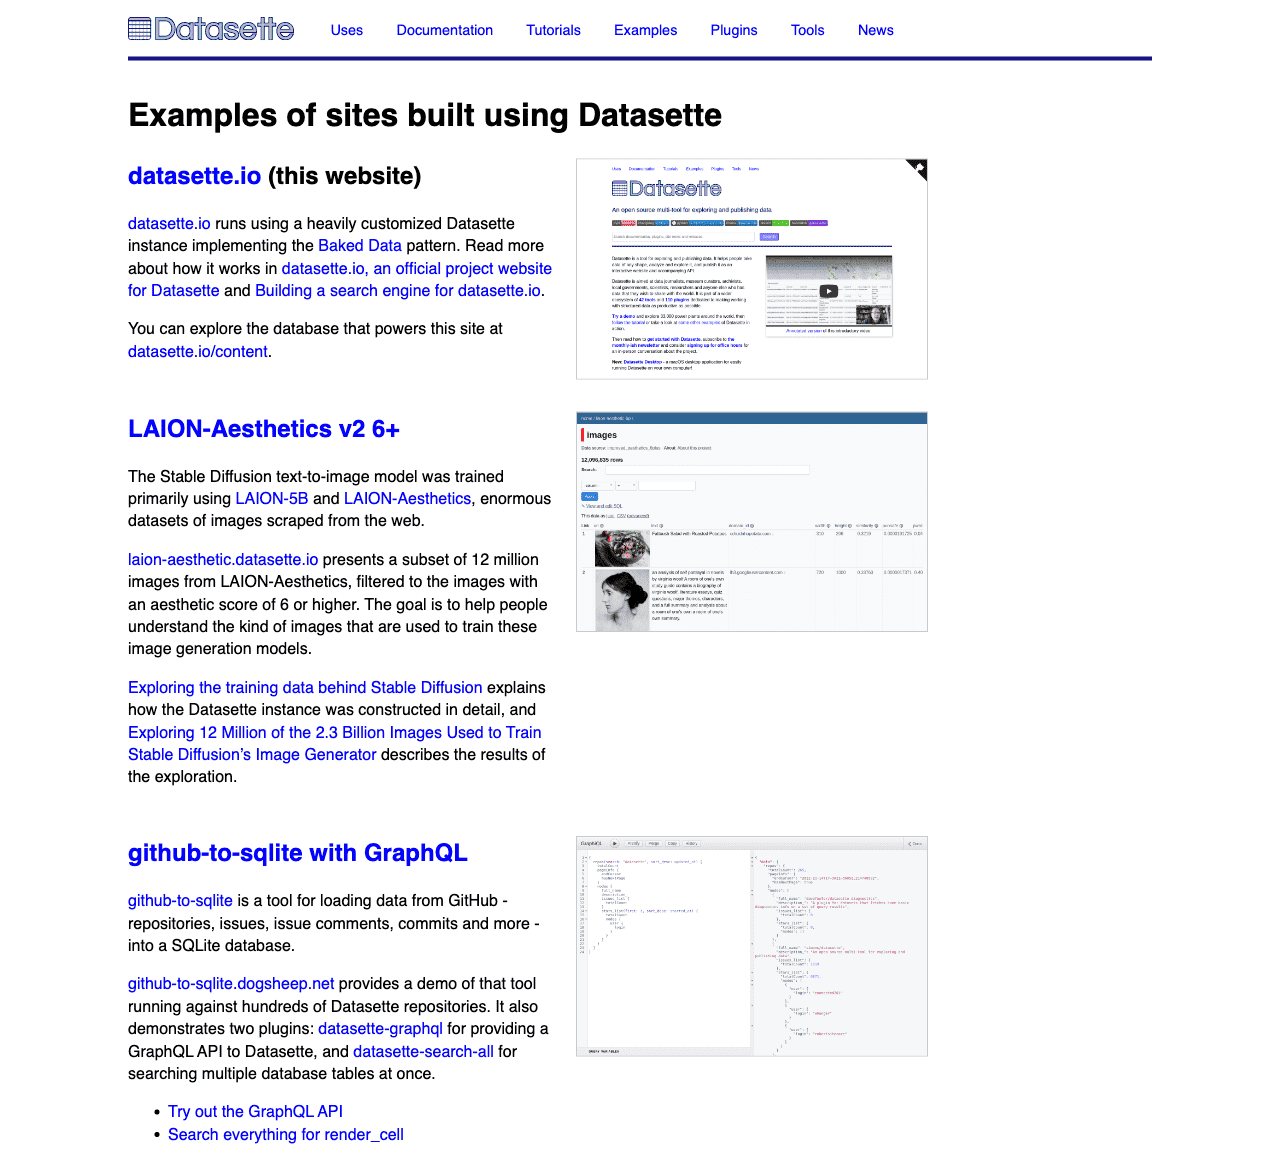 Screenshot of the Examples of sites built using Datasette page, featuring datasette.io and LAION-Aesthetics and github-to-sqlite with GraphQL